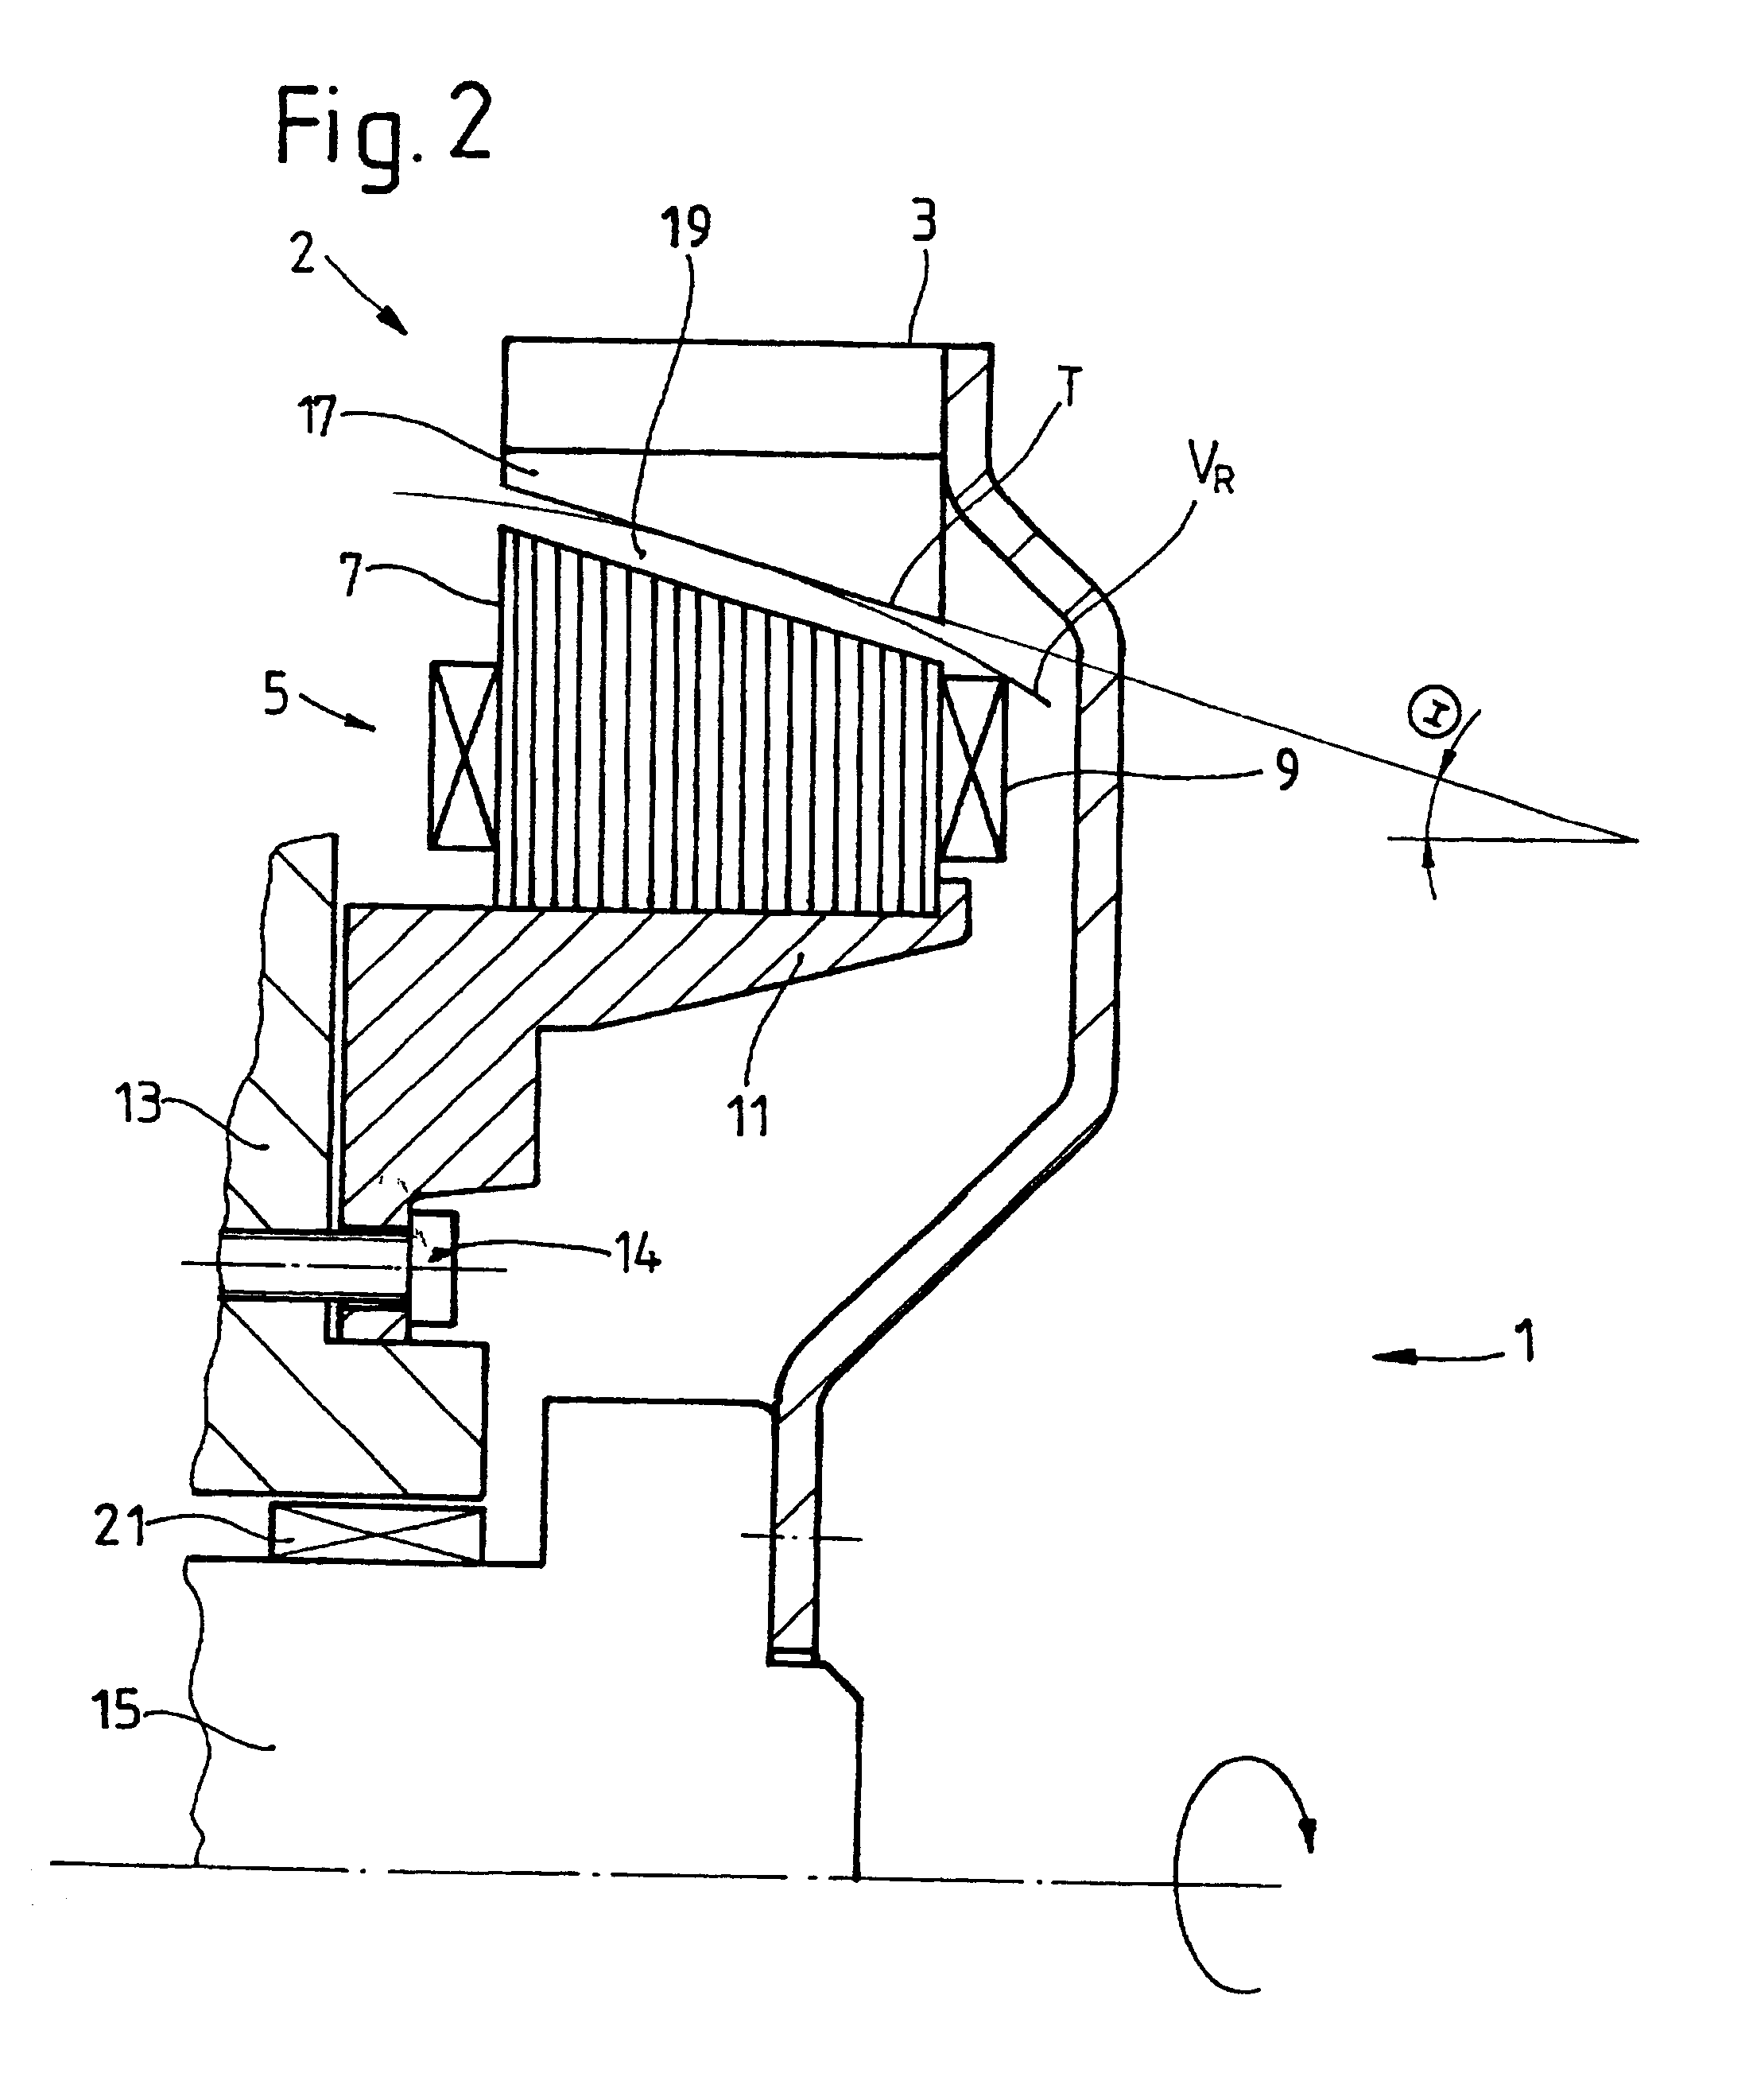 Drive unit with an electric machine